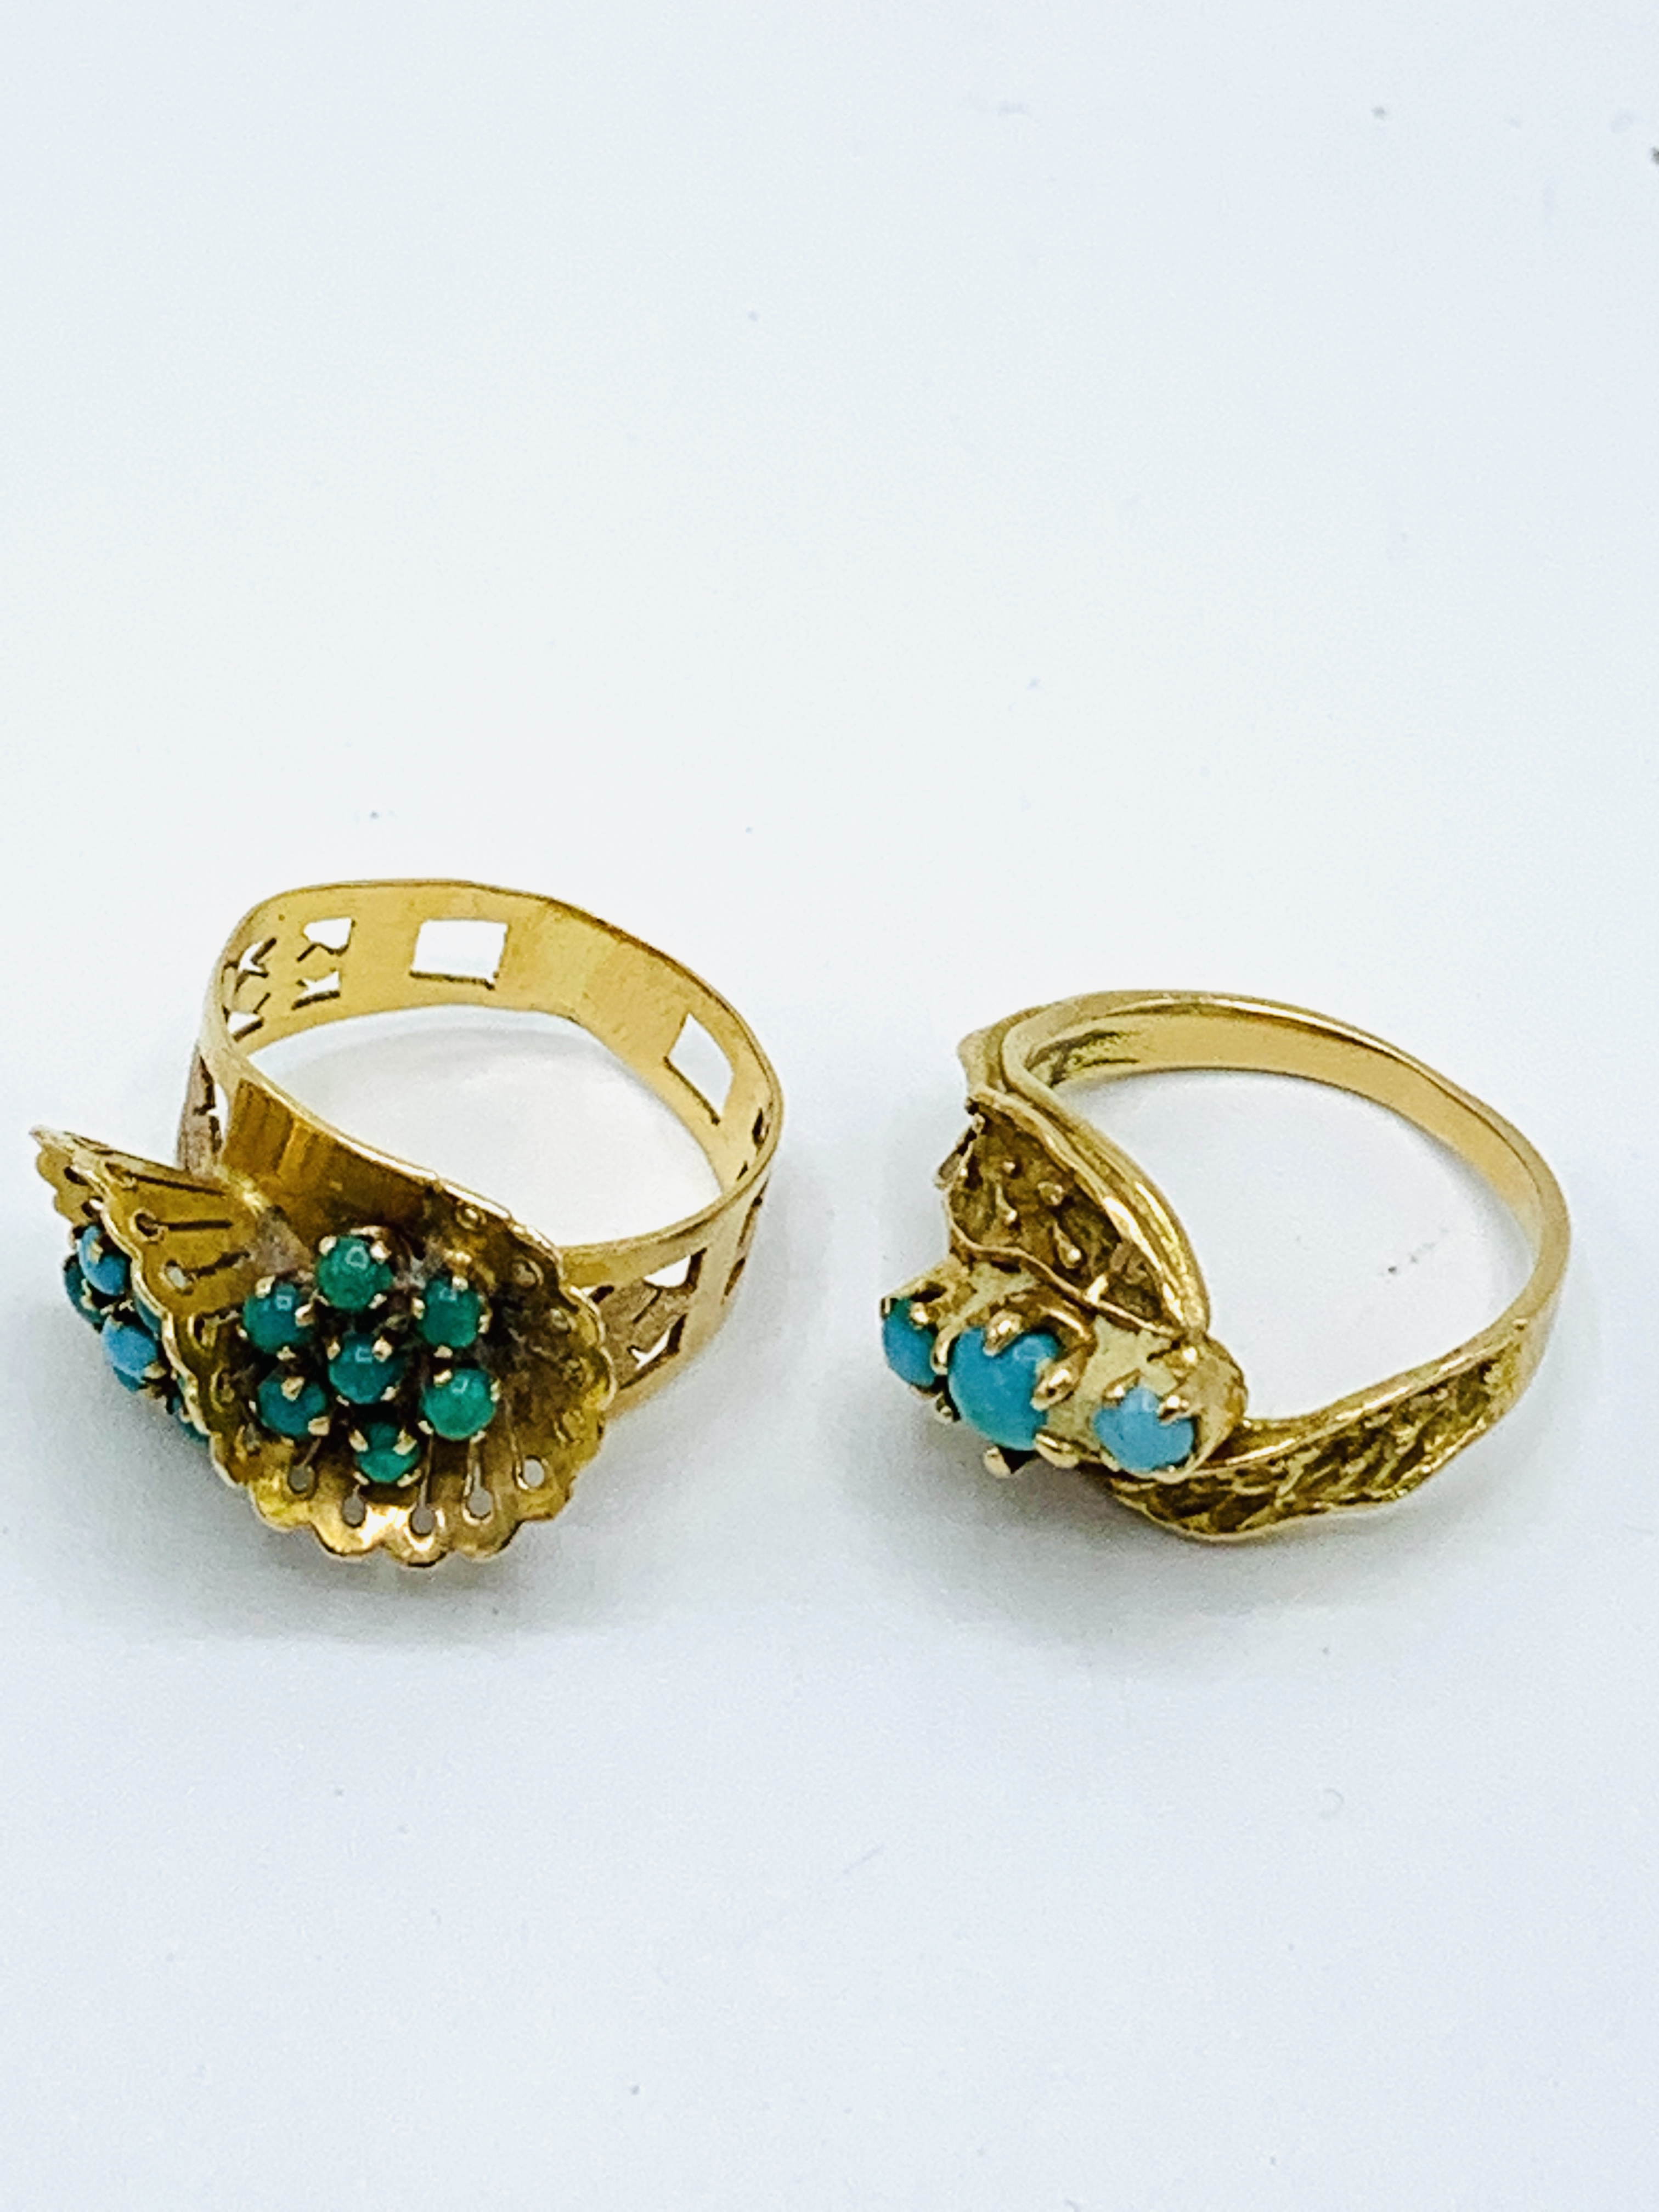 Two 18ct gold and turquoise rings - Image 2 of 4